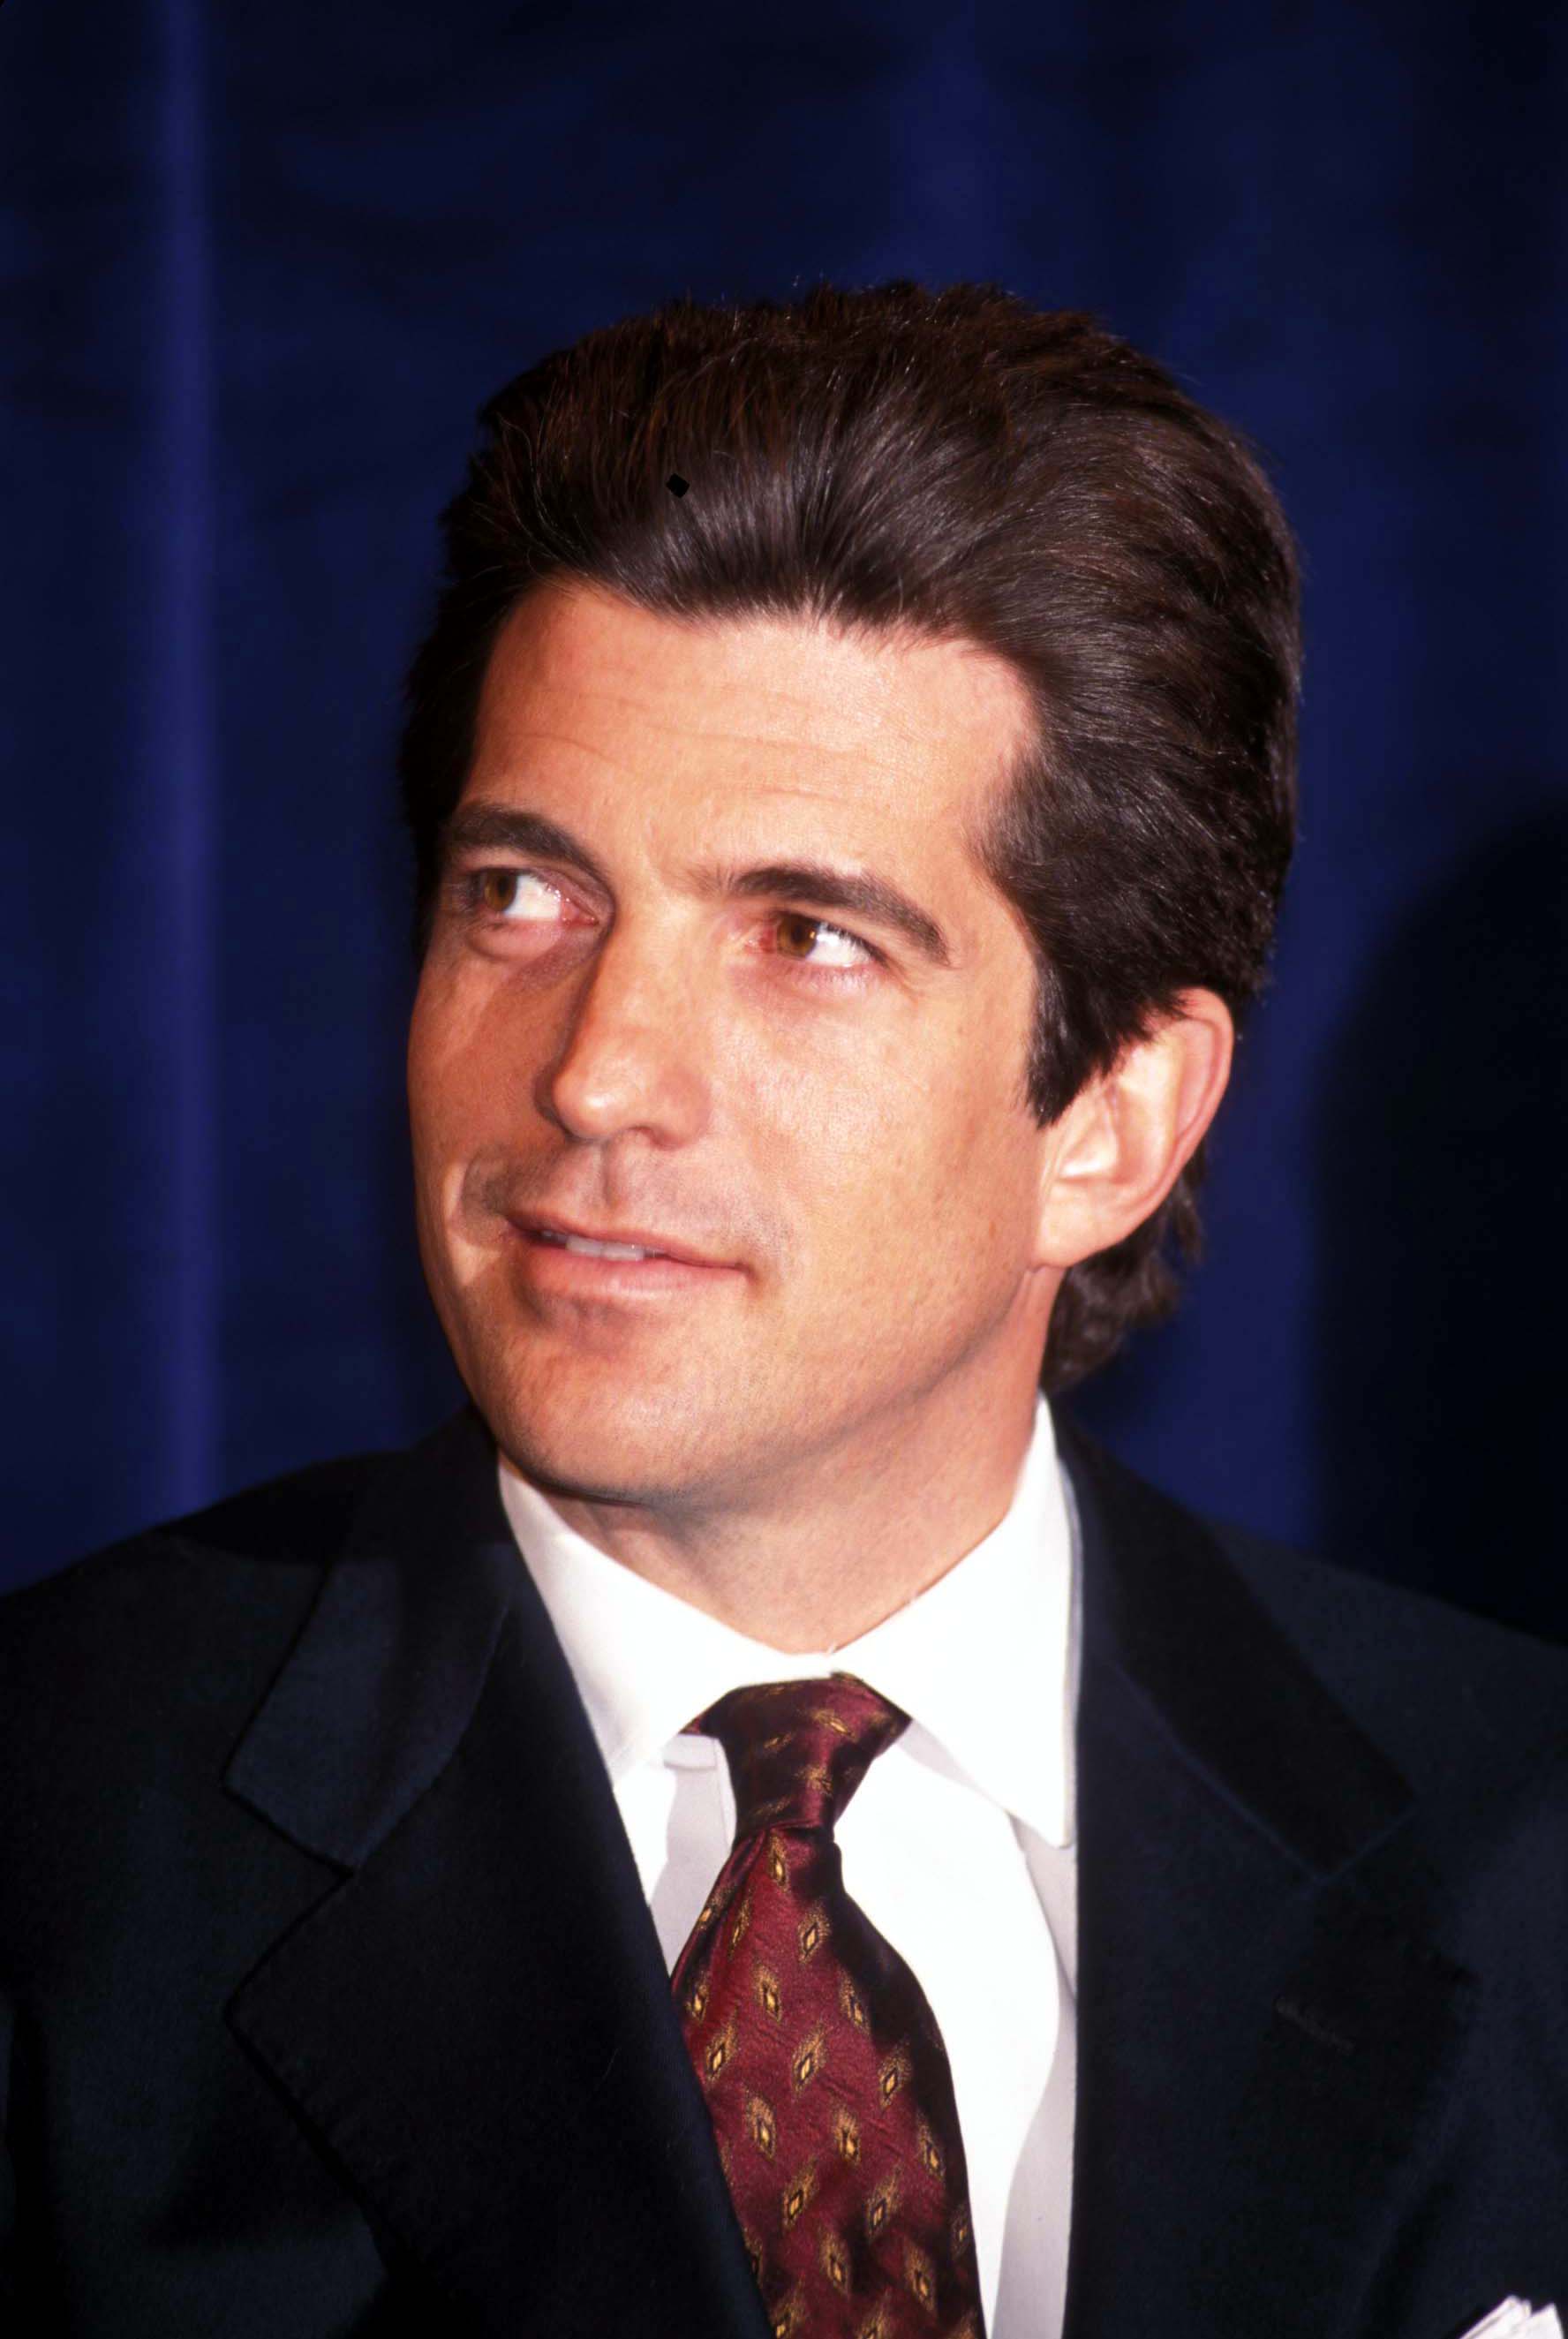 JFK Jr.'s Pilot Skills and Recklessness May Have Caused Death | In ...